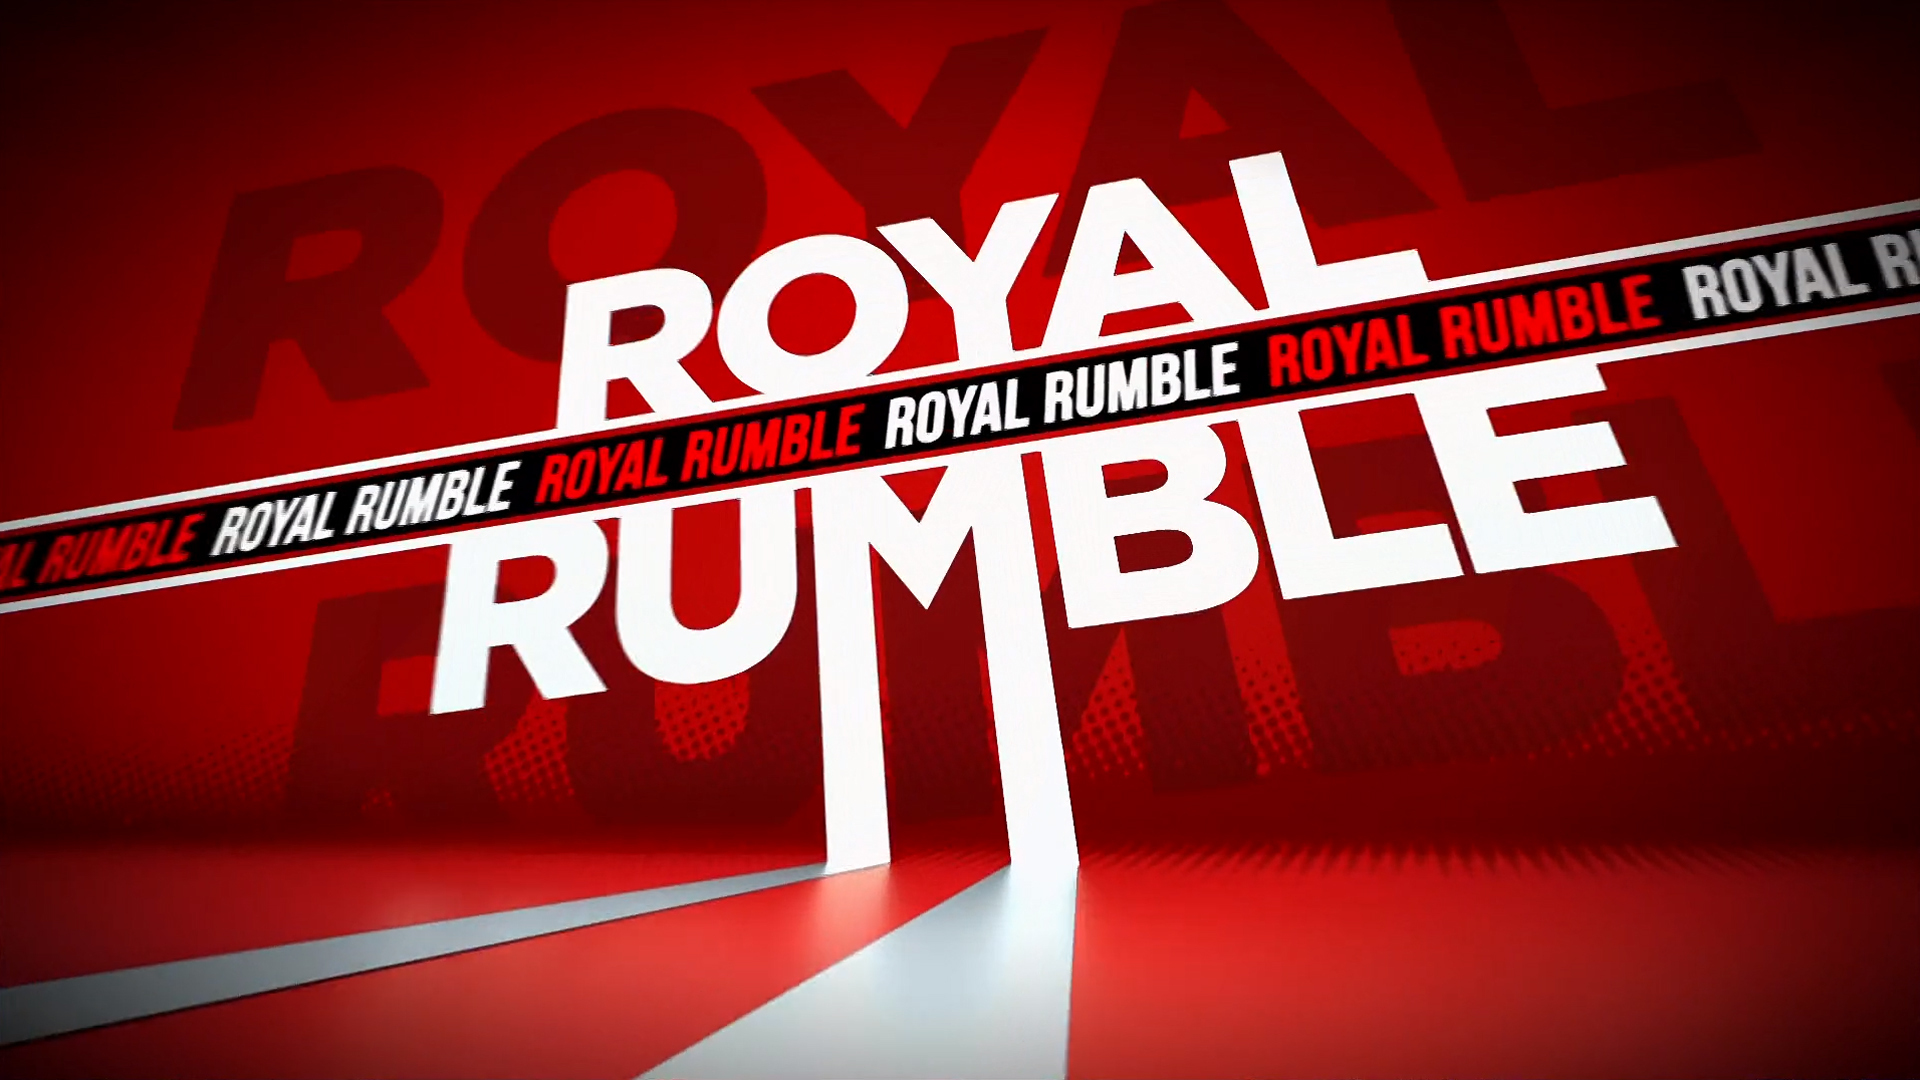 Wwe Royal Rumble 21 Results Reviewing Top Highlights And Low Points Bleacher Report Latest News Videos And Highlights